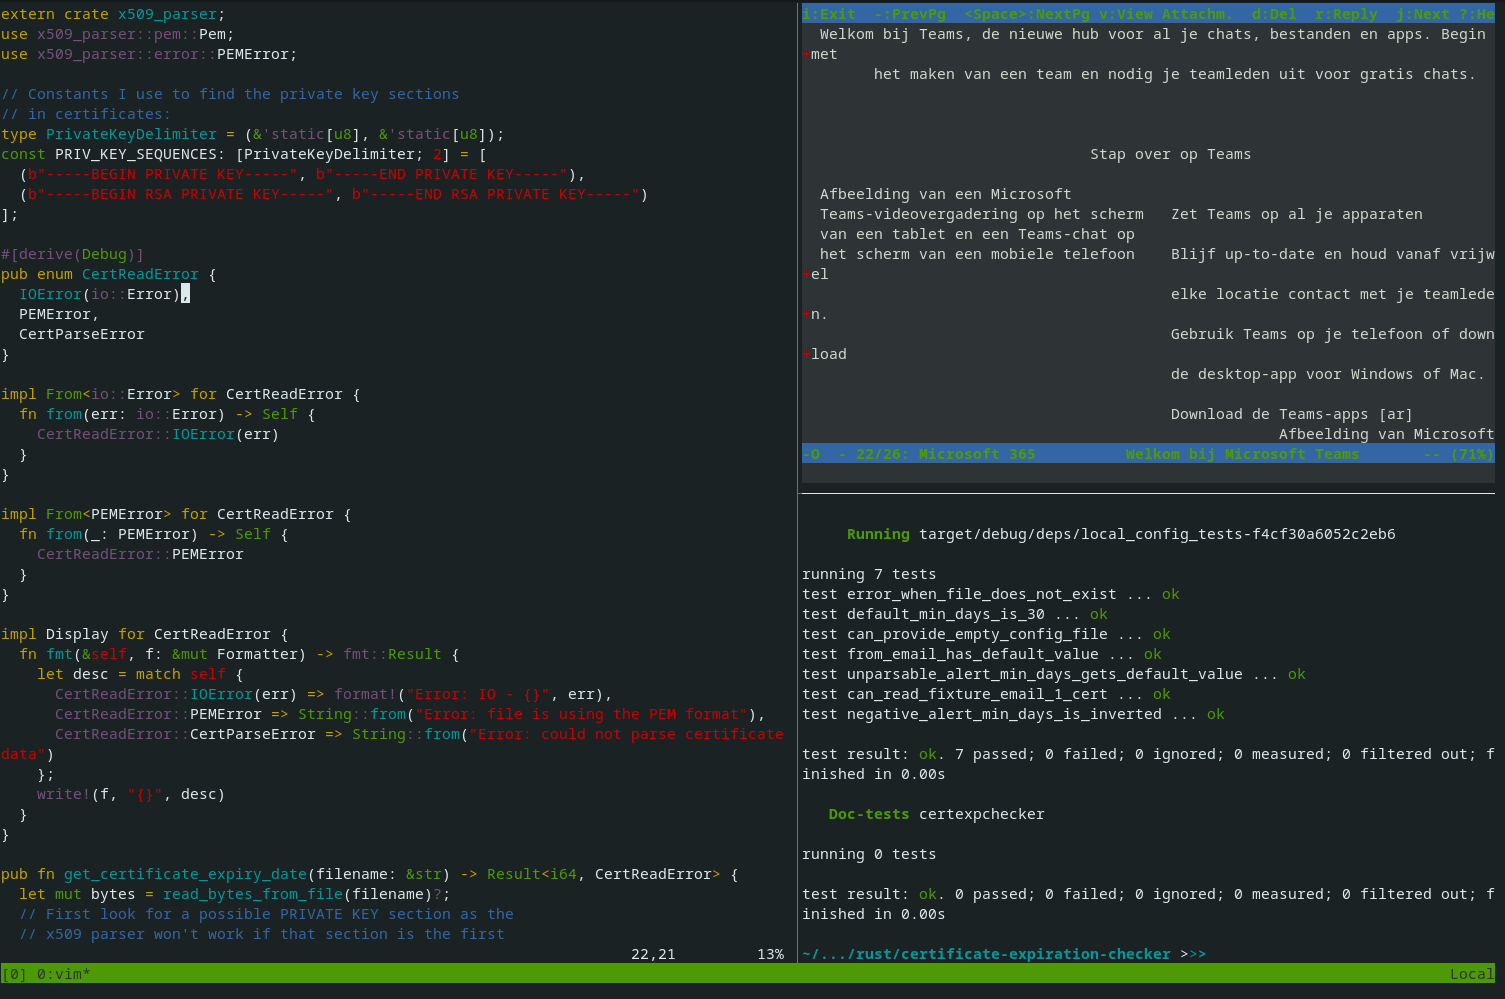 Showing multiple panels opened on Tmux